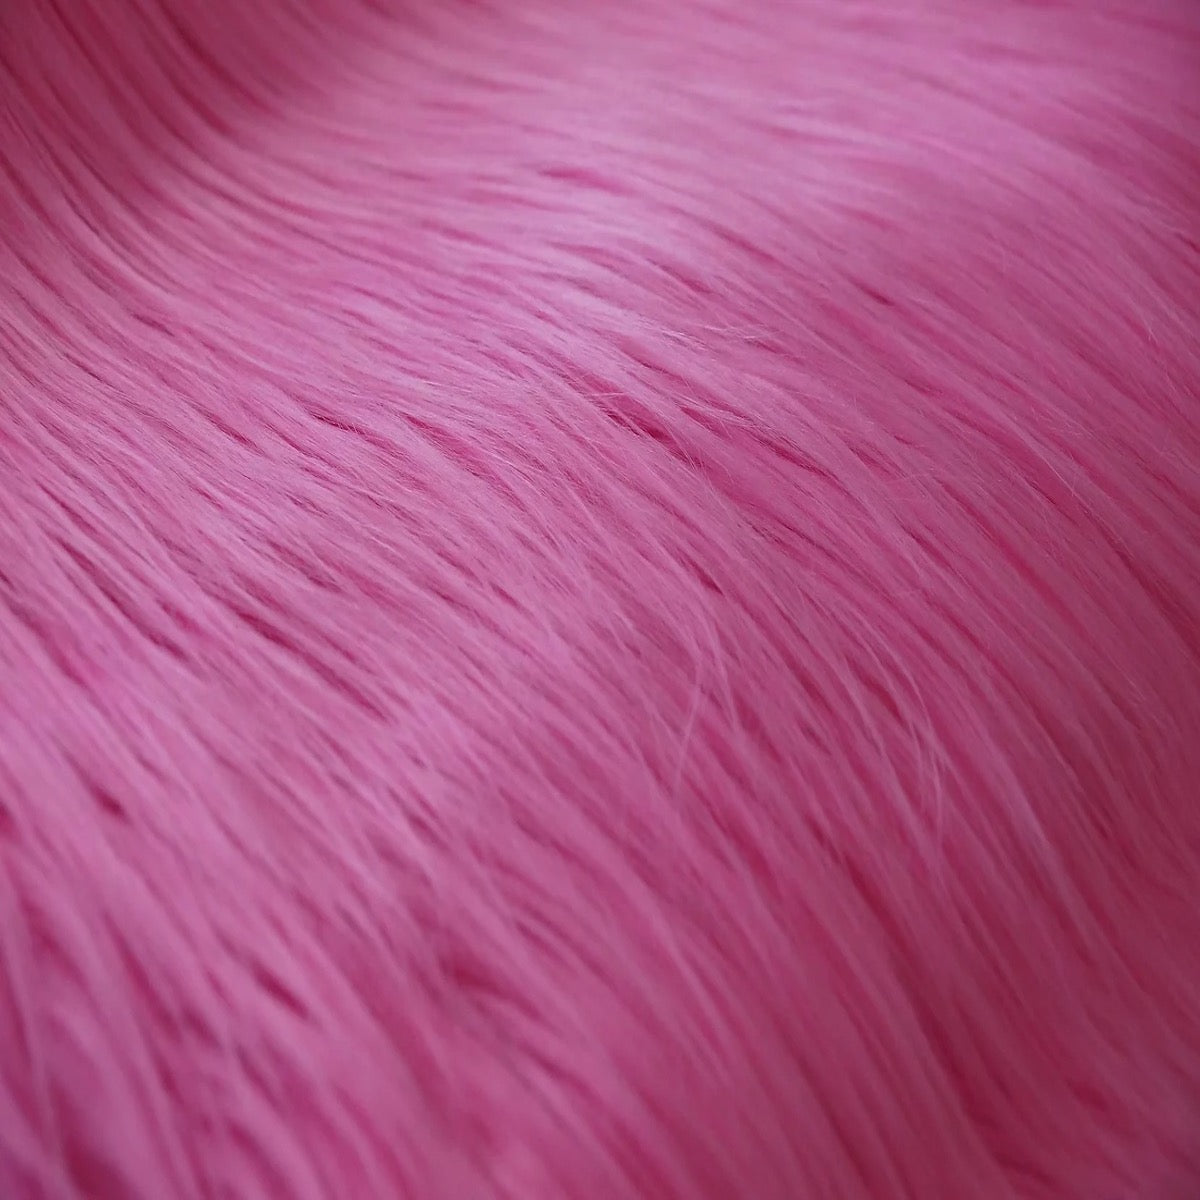  Solid Shaggy Faux/Fake Fur Fabric-Hot Pink-Long Pile 60 Sold  By The Yard : Arts, Crafts & Sewing